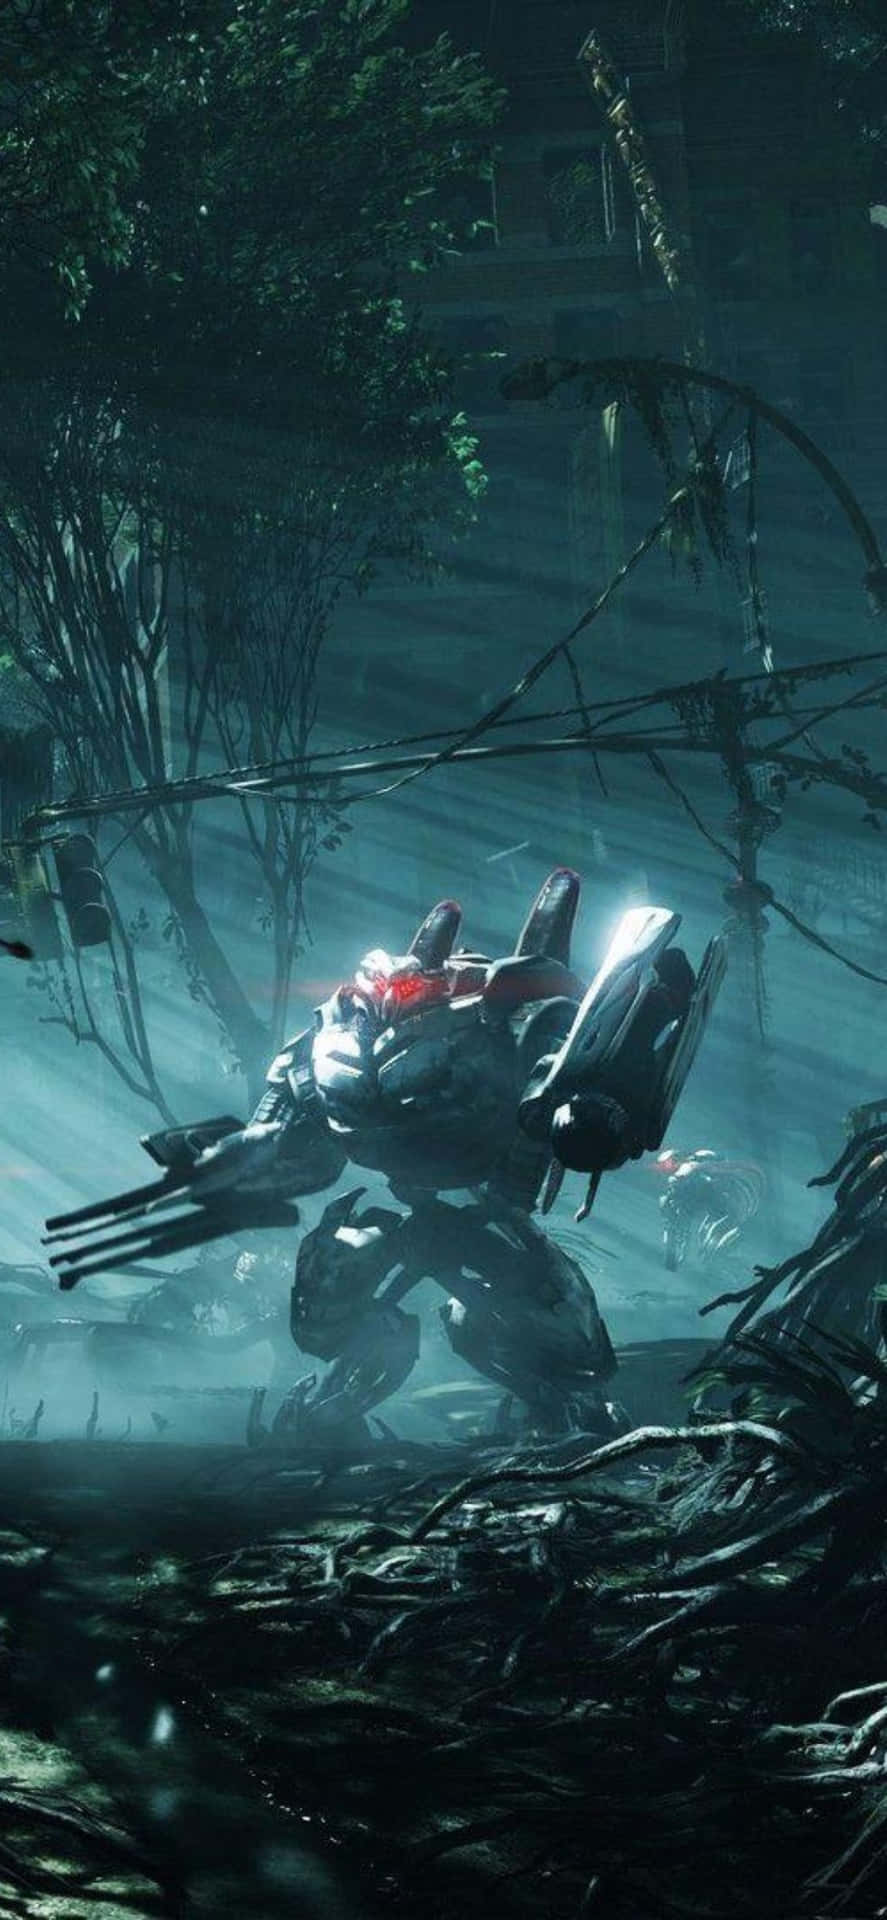 Be unstoppable with #iPhoneX and Crysis 3